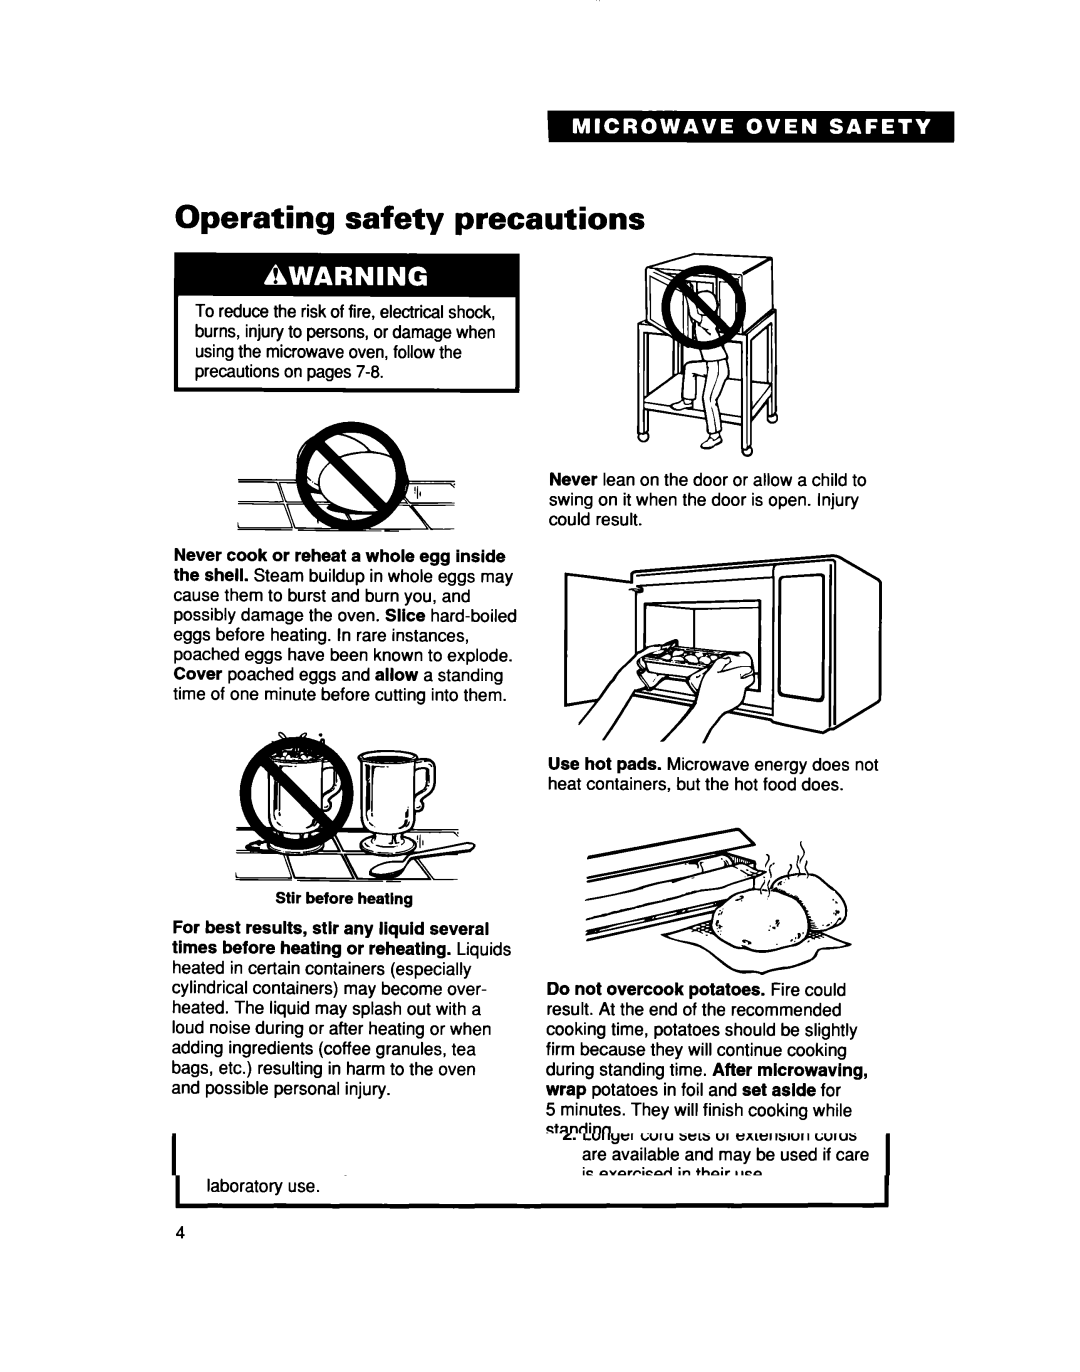 Whirlpool MT7076XD, Ml7078XD Operating safety precautions, Minutes. They will finish cooking while standing On next 